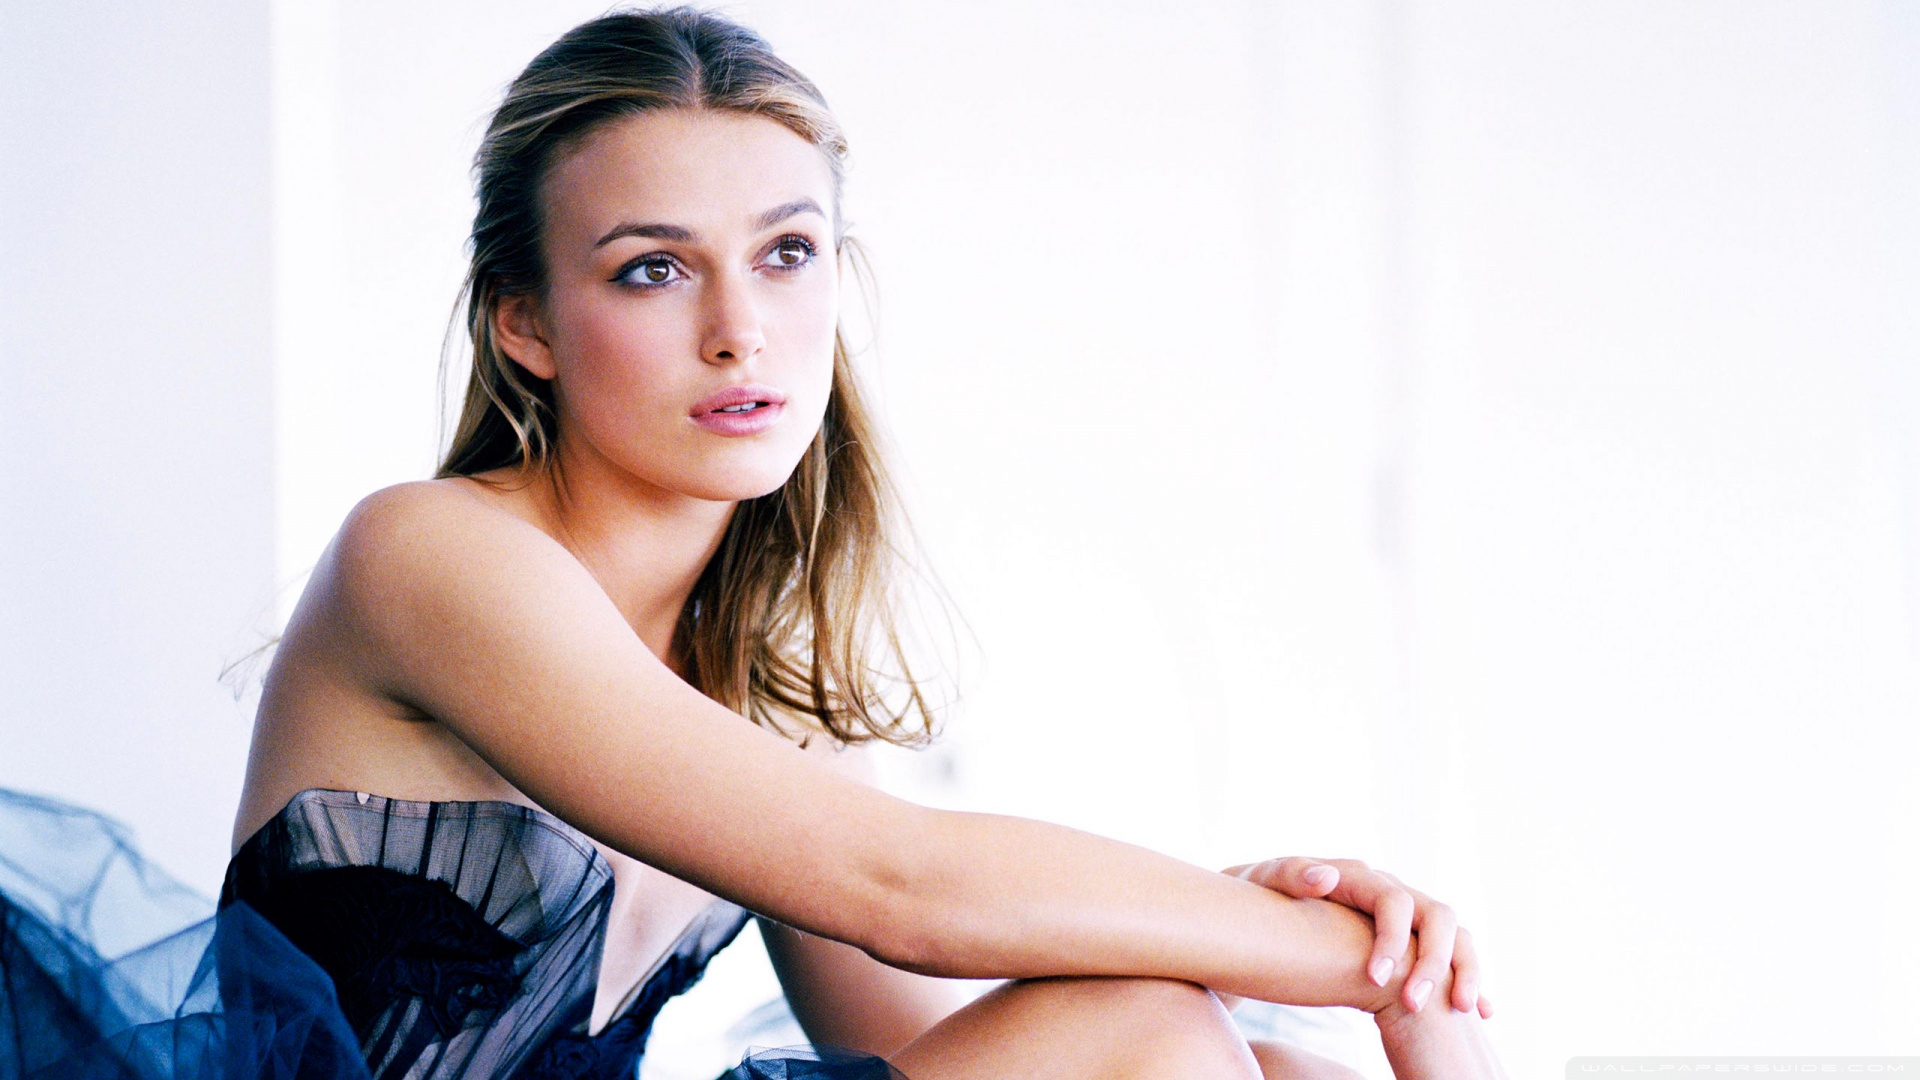 keira knightley hd wallpapers,hair,skin,sitting,beauty,hairstyle